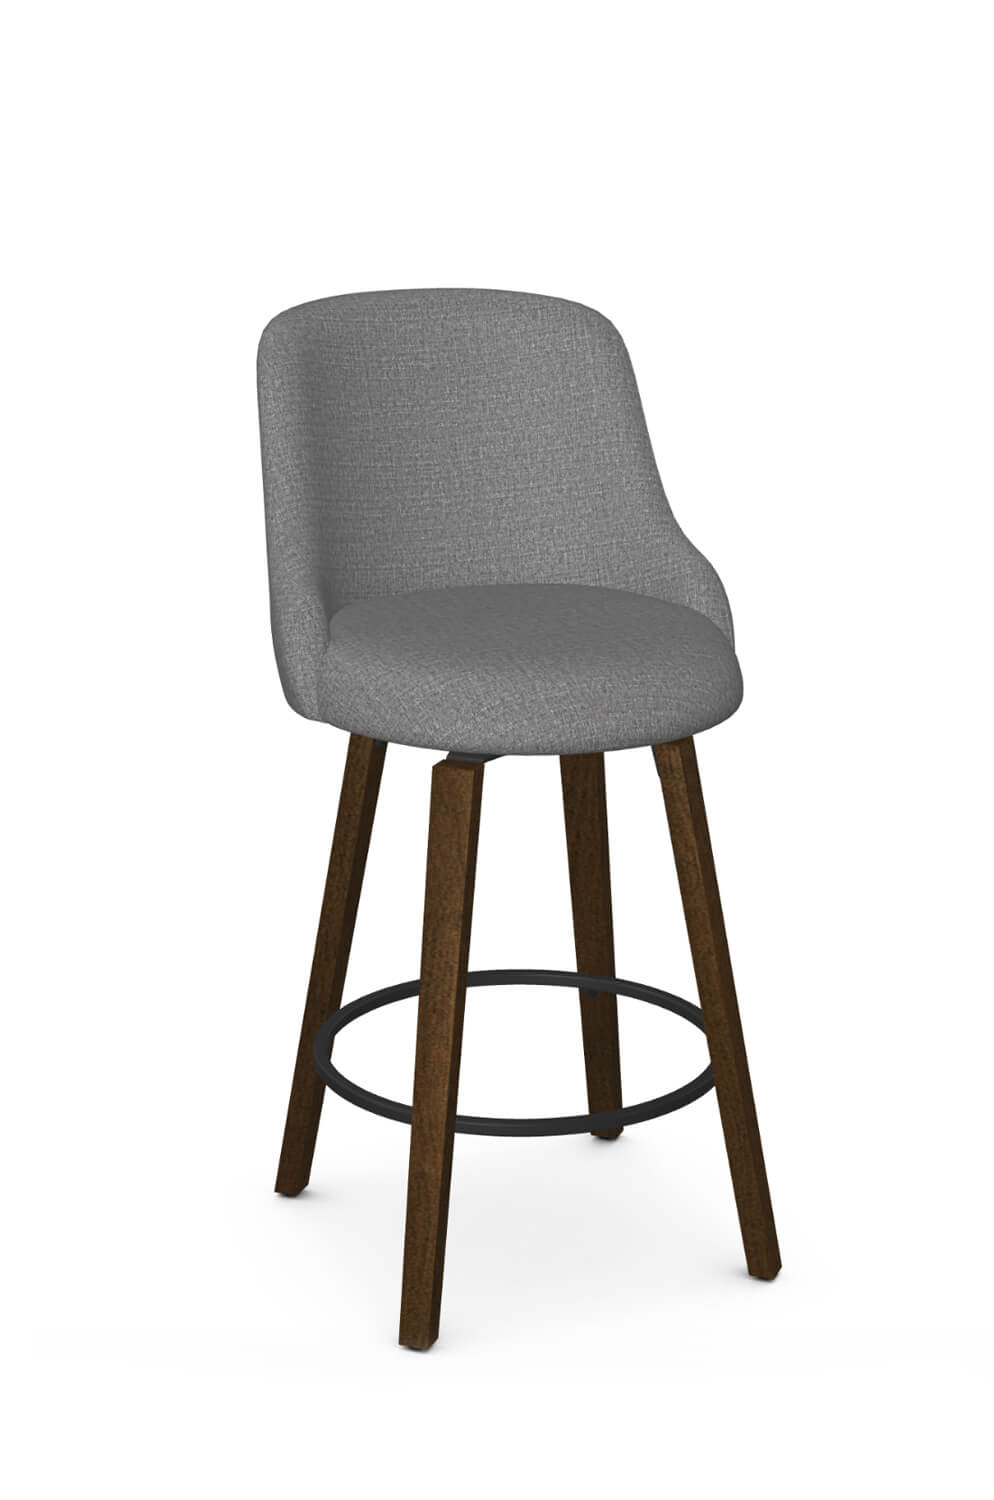 North 26.5 Seat Height Beige Upholstered Counter Height Stool